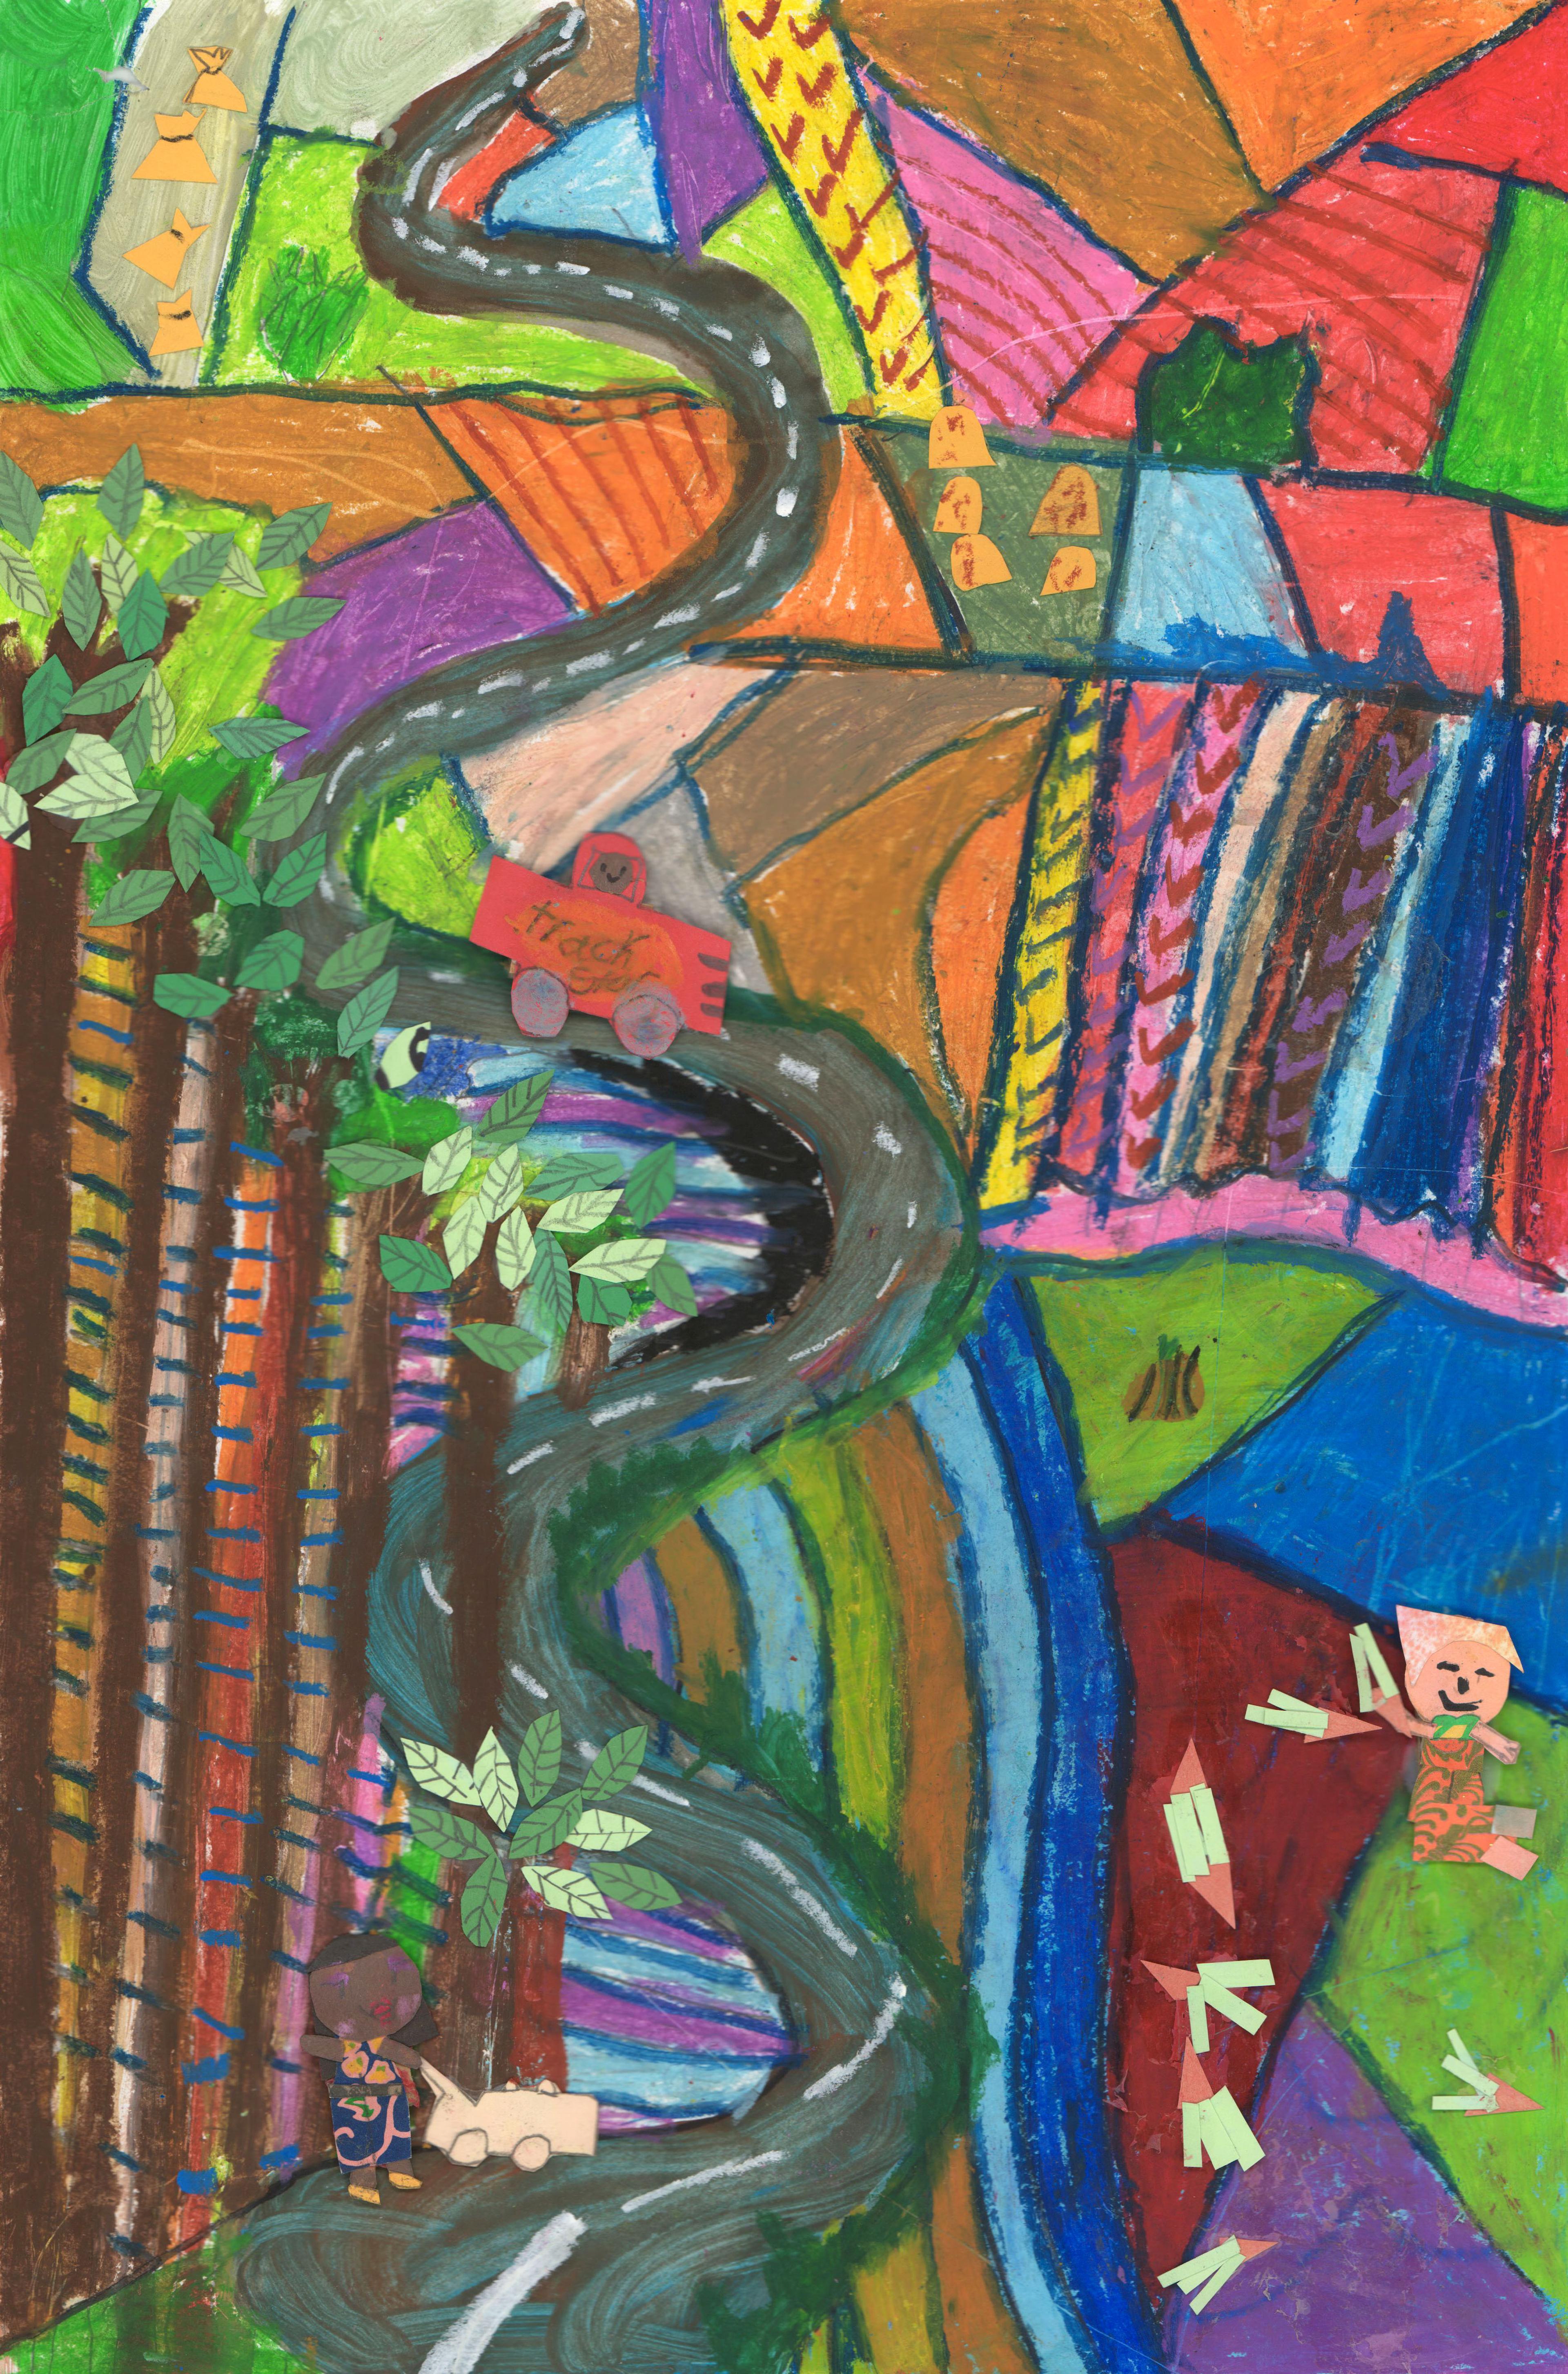 College of oil pastel and tempera depicting a red truck driving along a curvy, winding, gray road that snakes vertically from the top to the bottom of the image. Multiple colorful farm fields are divided into geometric patterns and cover the entire illustration on either side of the road. A row of tall trees stands at the bottom left side of the image. A person stands next to a small light colored vehicle parked on the road near the bottom. To the bottom right, a smiling person works in a field.